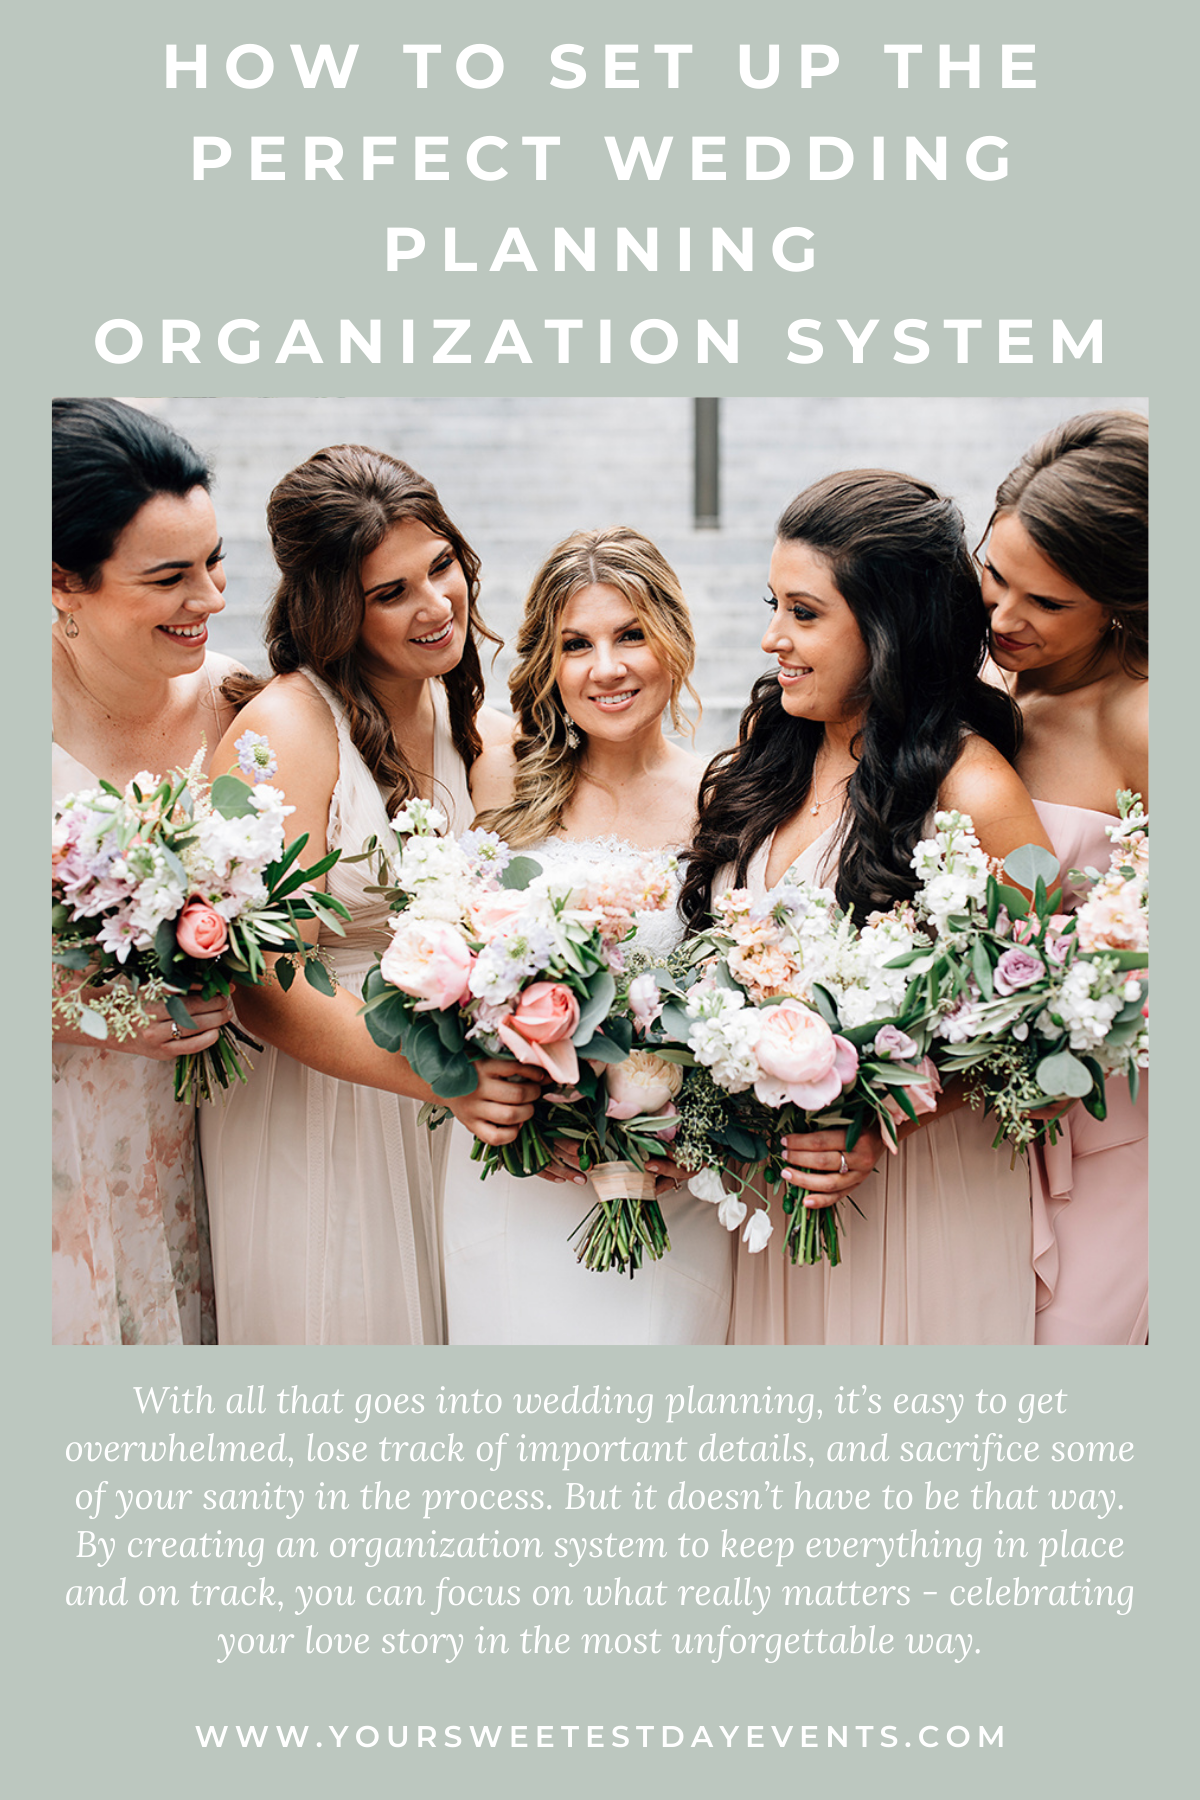 How To Set Up The Perfect Wedding Planning Organization System // Your Sweetest Day Events (relevant hashtags: #weddingplanning #engaged #shesaidyes)